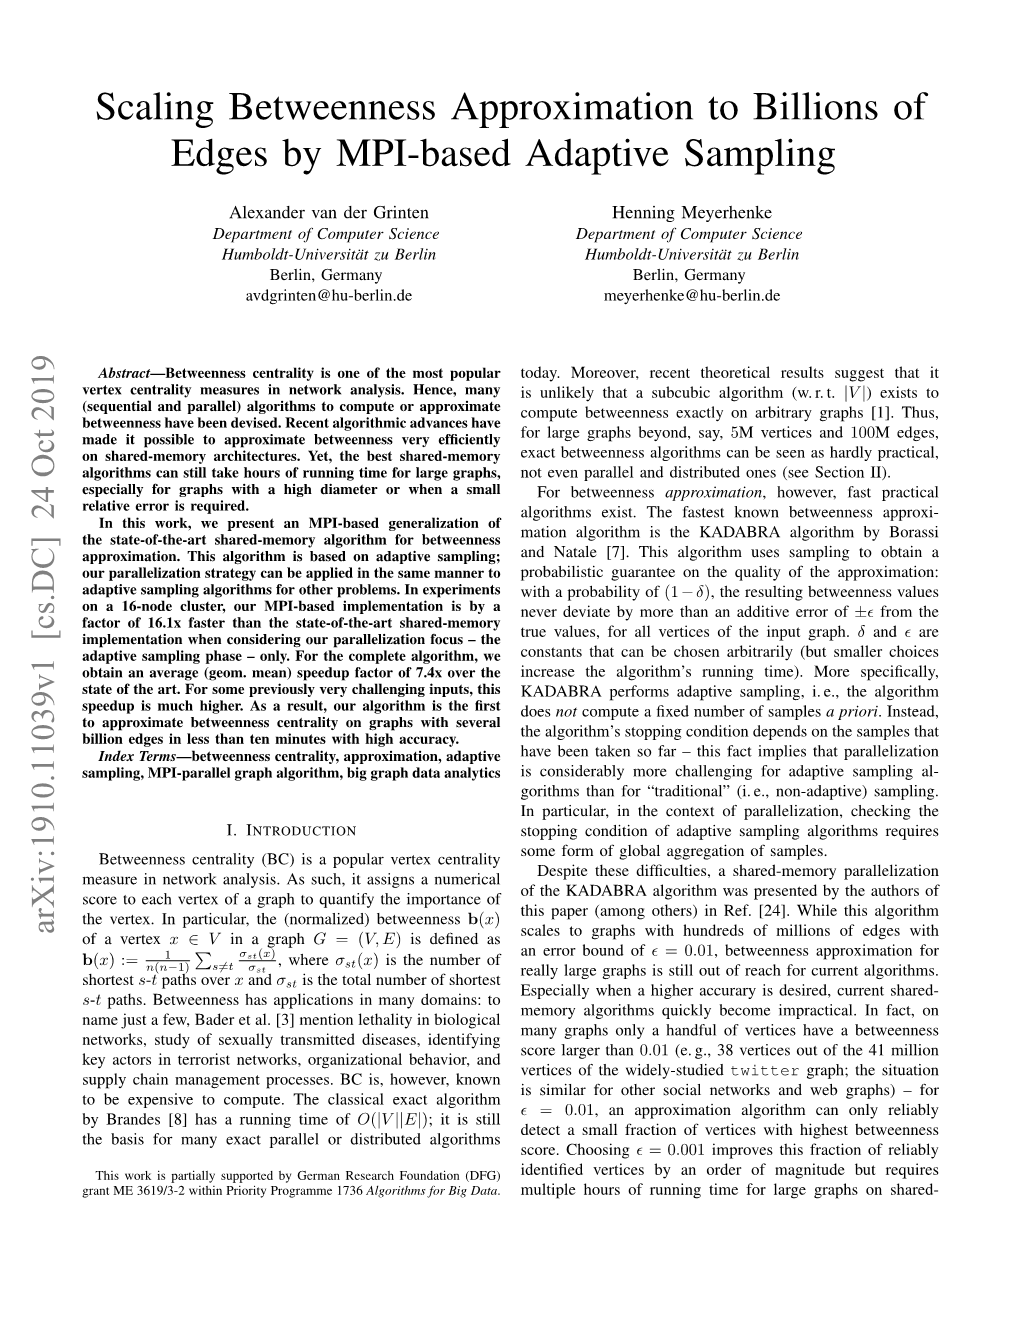 Scaling Betweenness Approximation to Billions of Edges by MPI-Based Adaptive Sampling